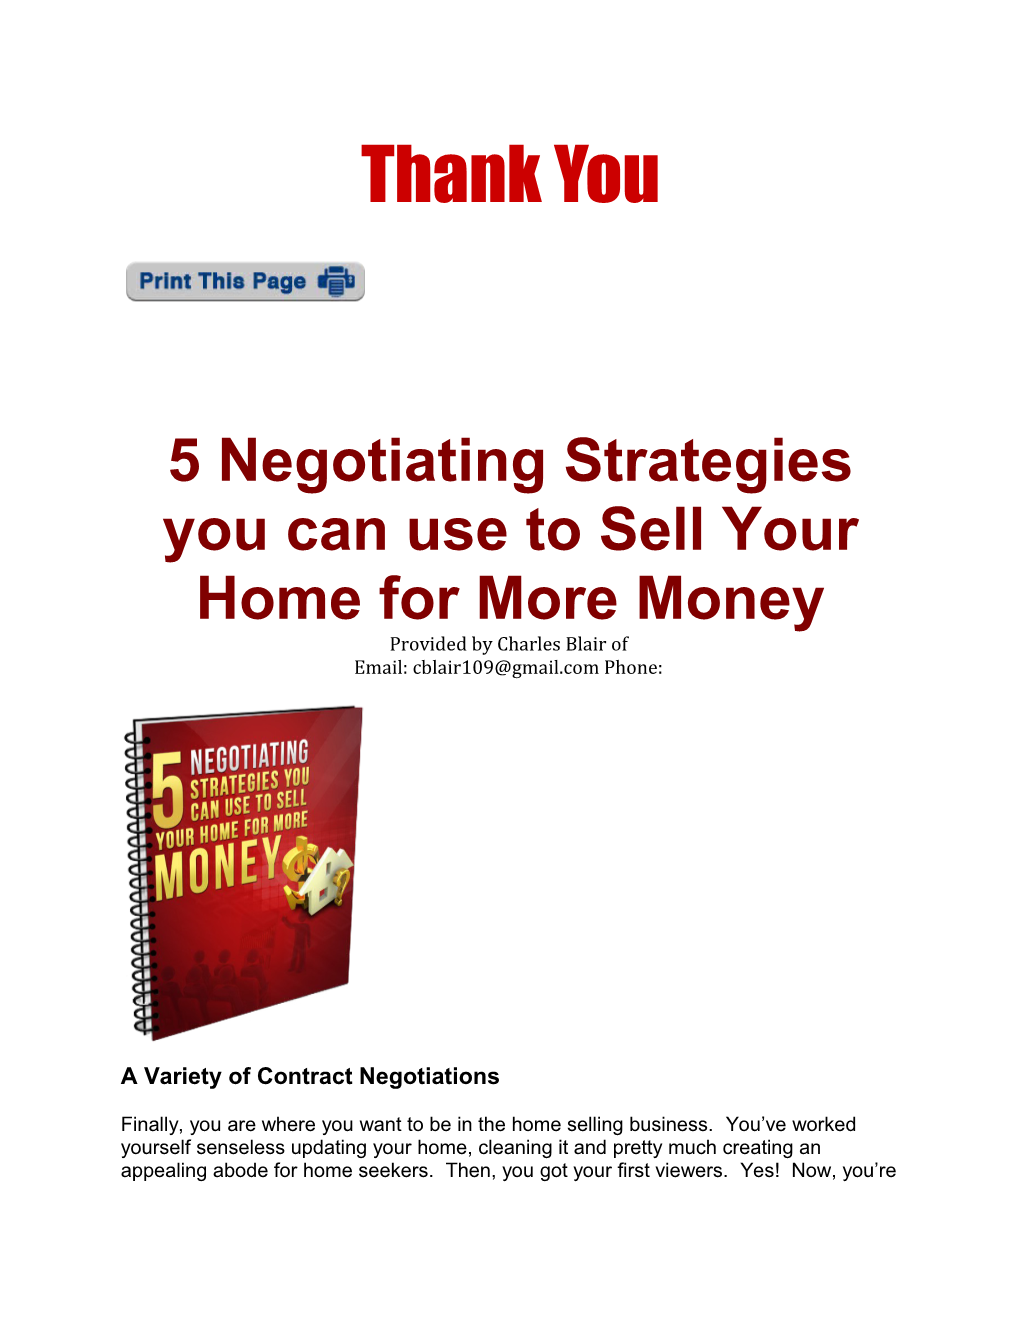 5 Negotiating Strategies You Can Use to Sell Your Home for More Money